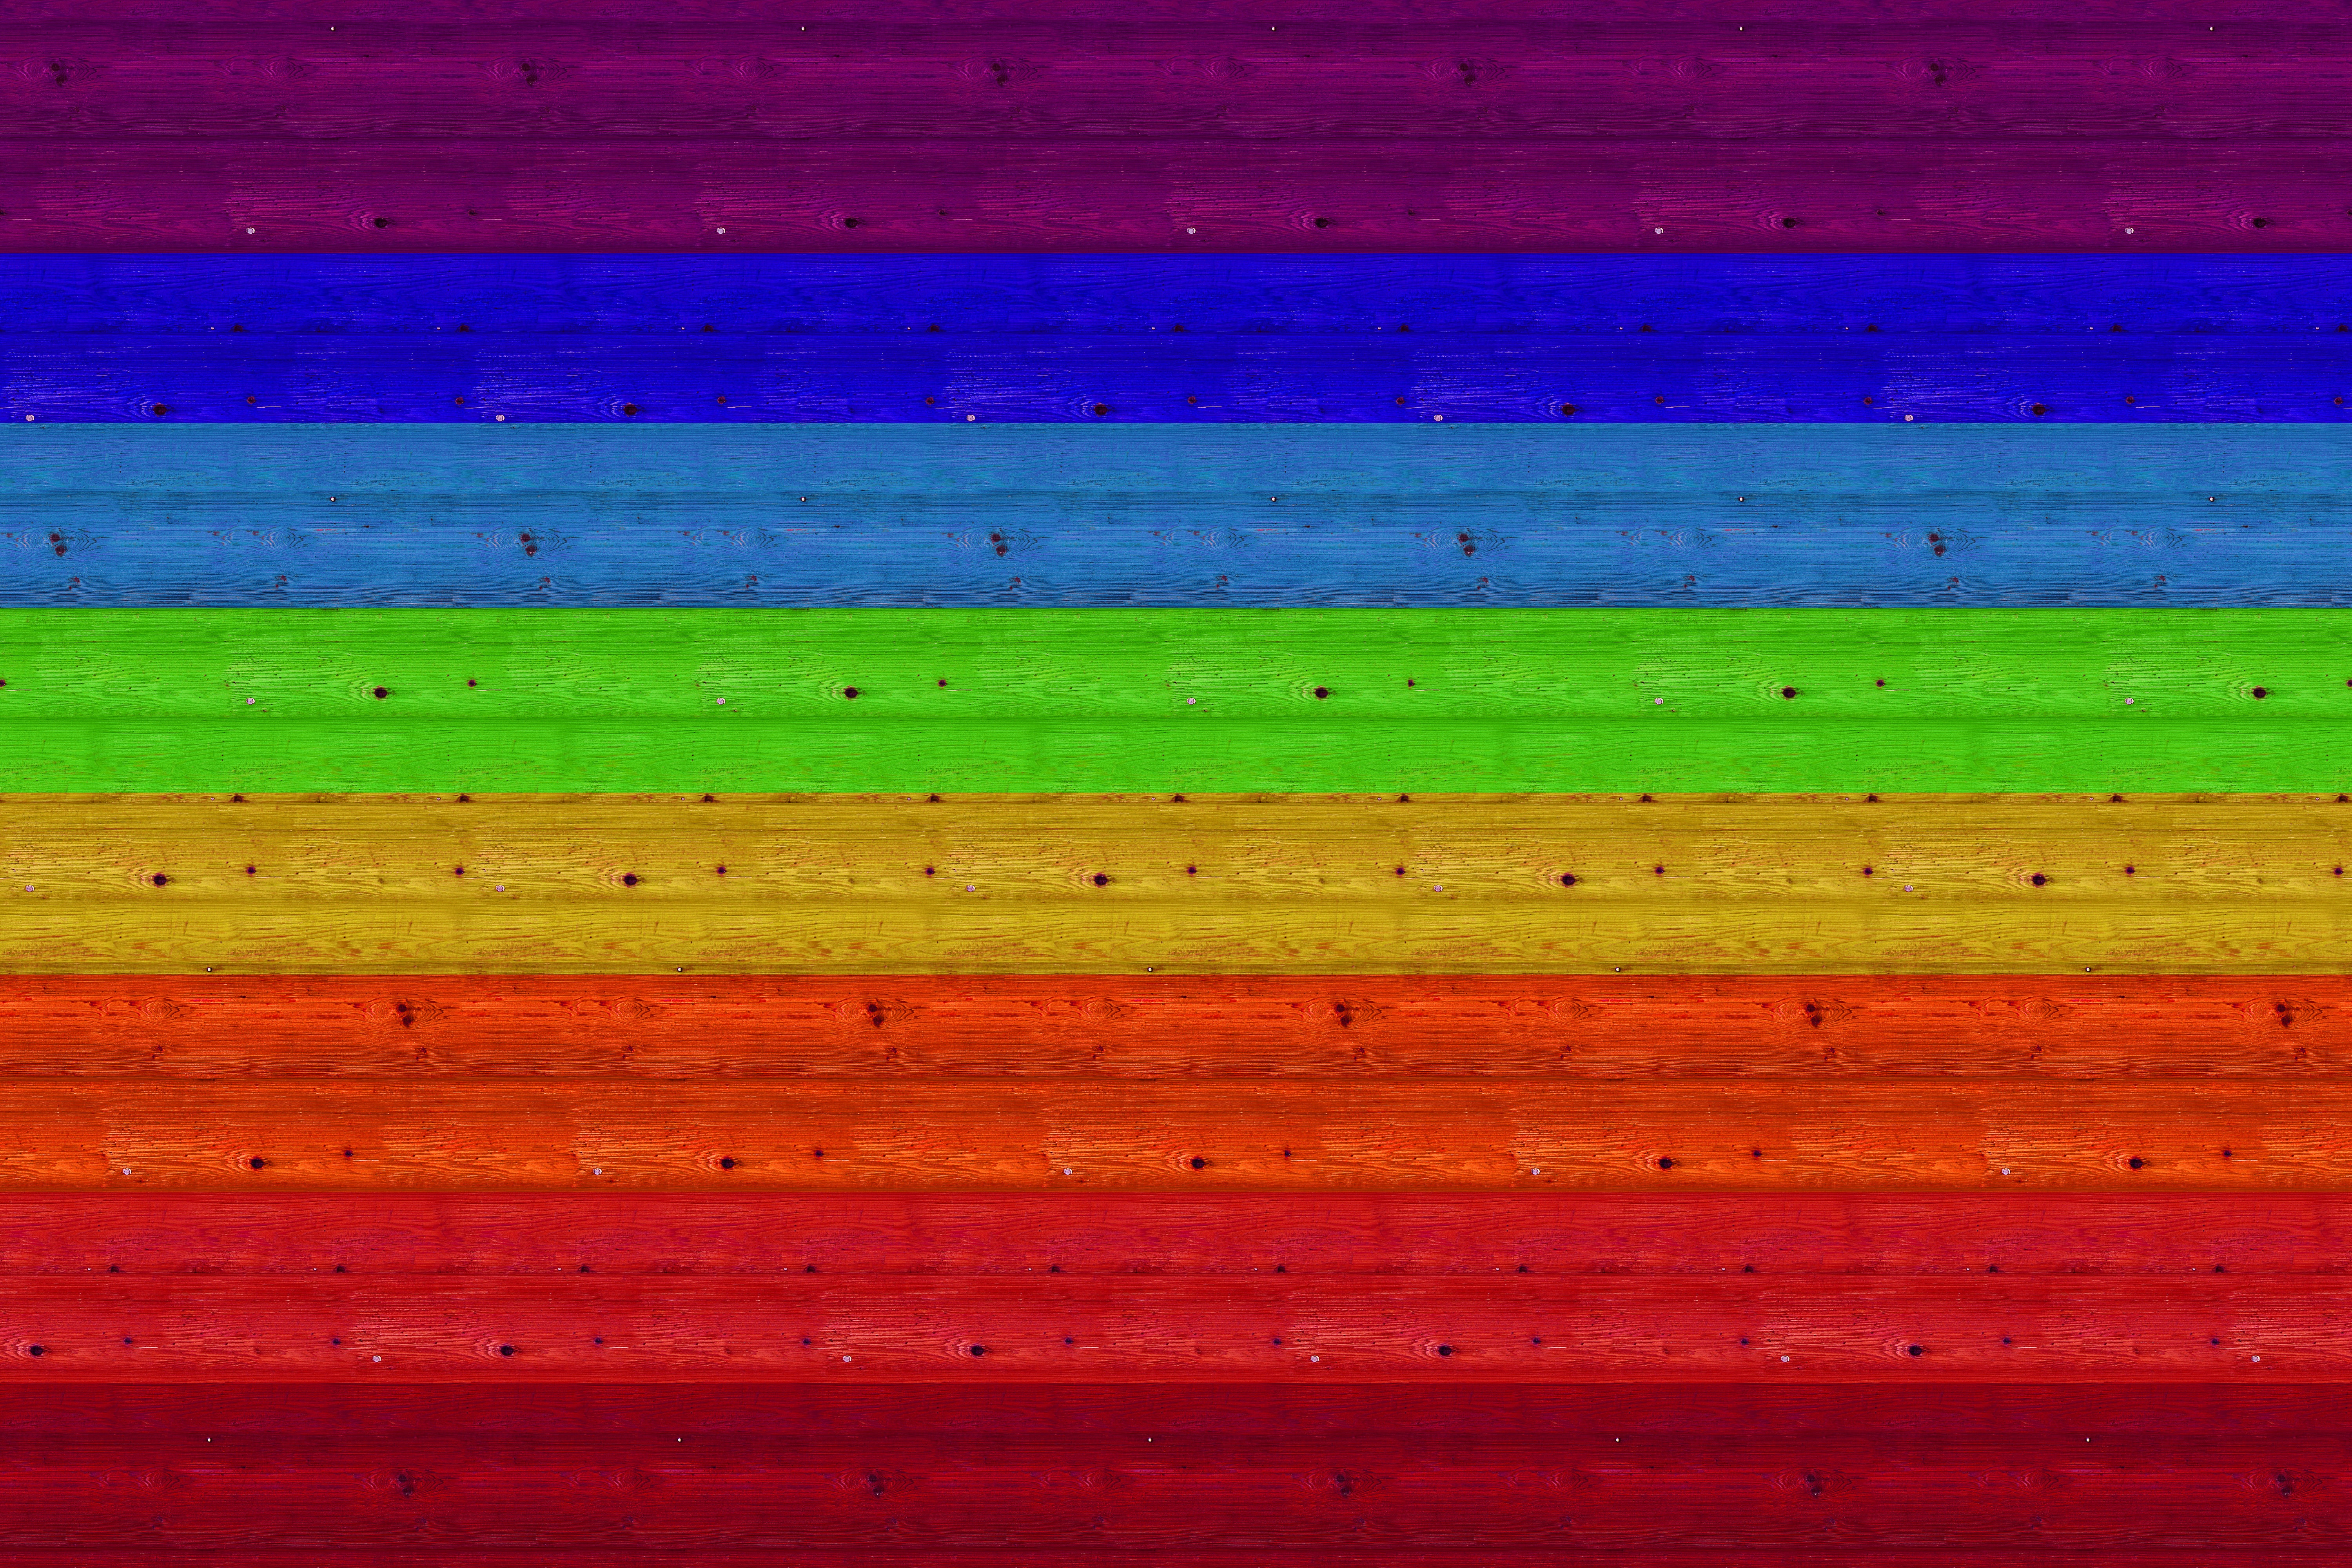 motley, textures, multicolored, texture, rainbow, wall, iridescent, planks, board cell phone wallpapers